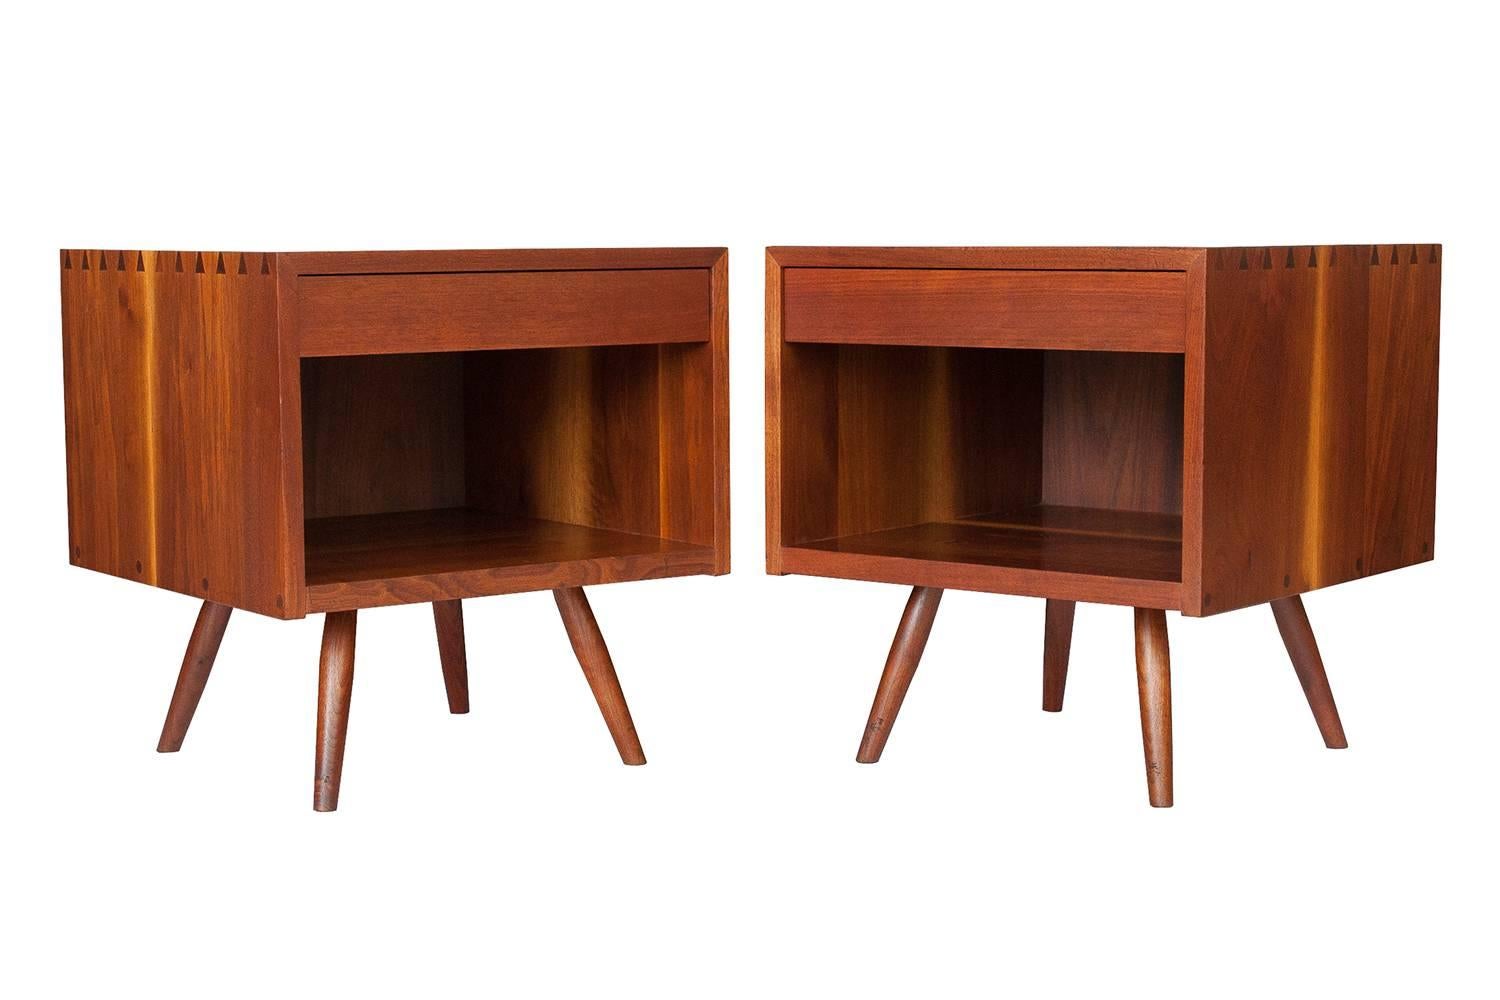 Pair of rare Nakashima Studio nightstands or end tables in American black walnut. Solid walnut construction. Hand-cut dovetail joints and a single drawer. Hand rubbed oil finish. 

Nakashima's 1962 catalogue gives a detailed description of the